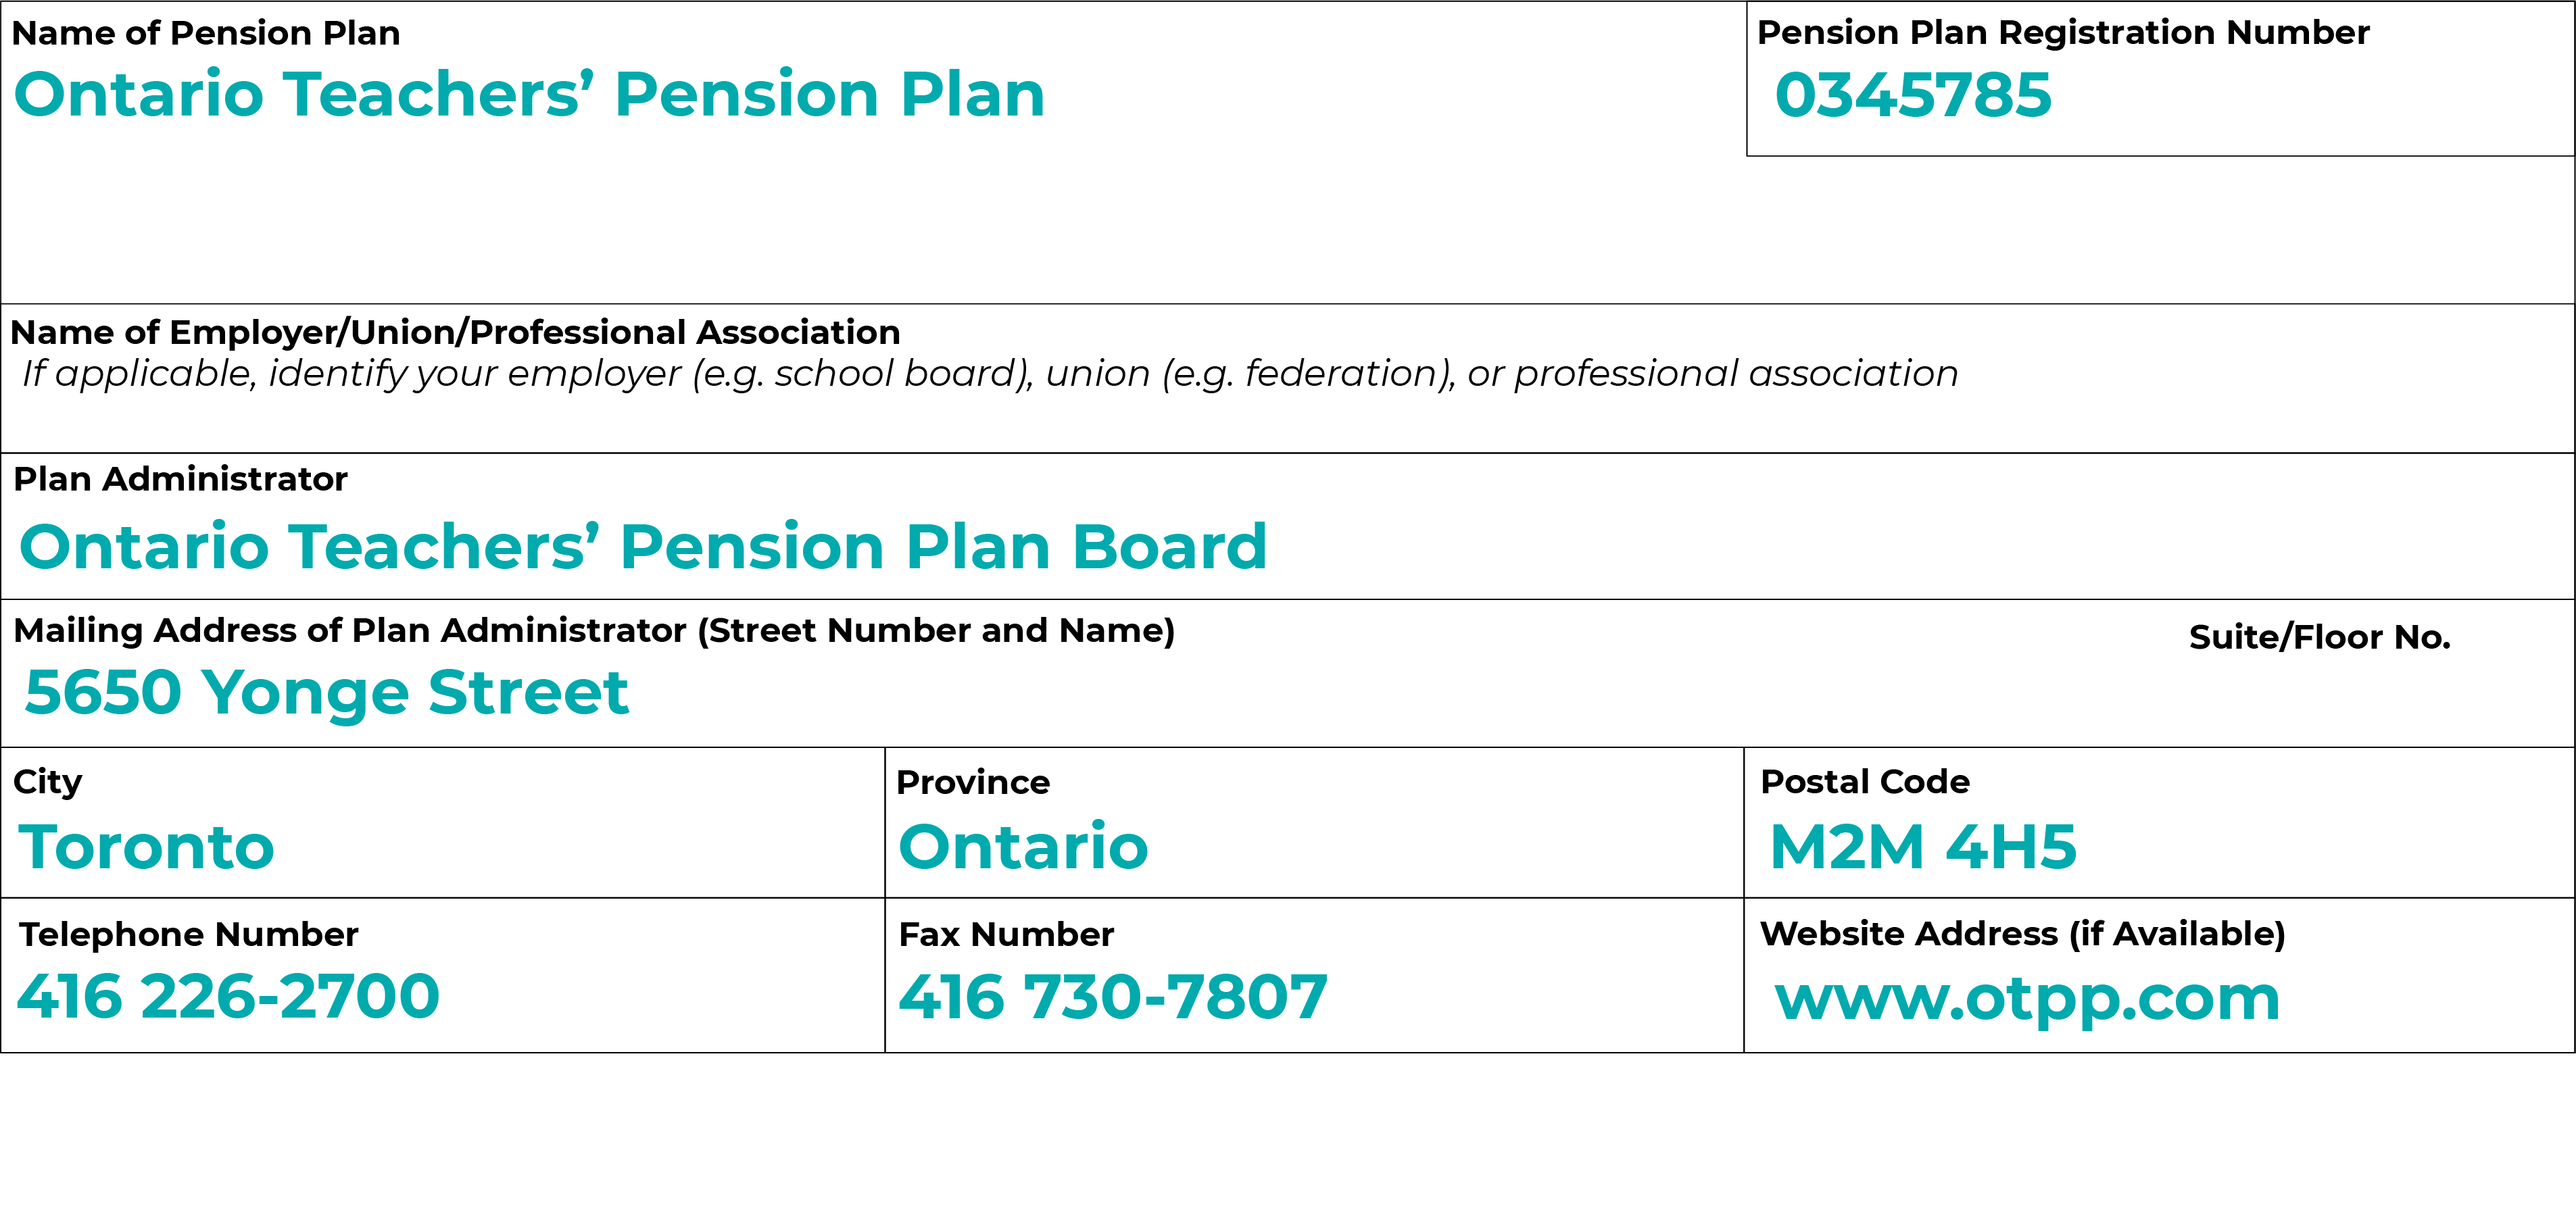 This is an example of a filled in pension plan information form